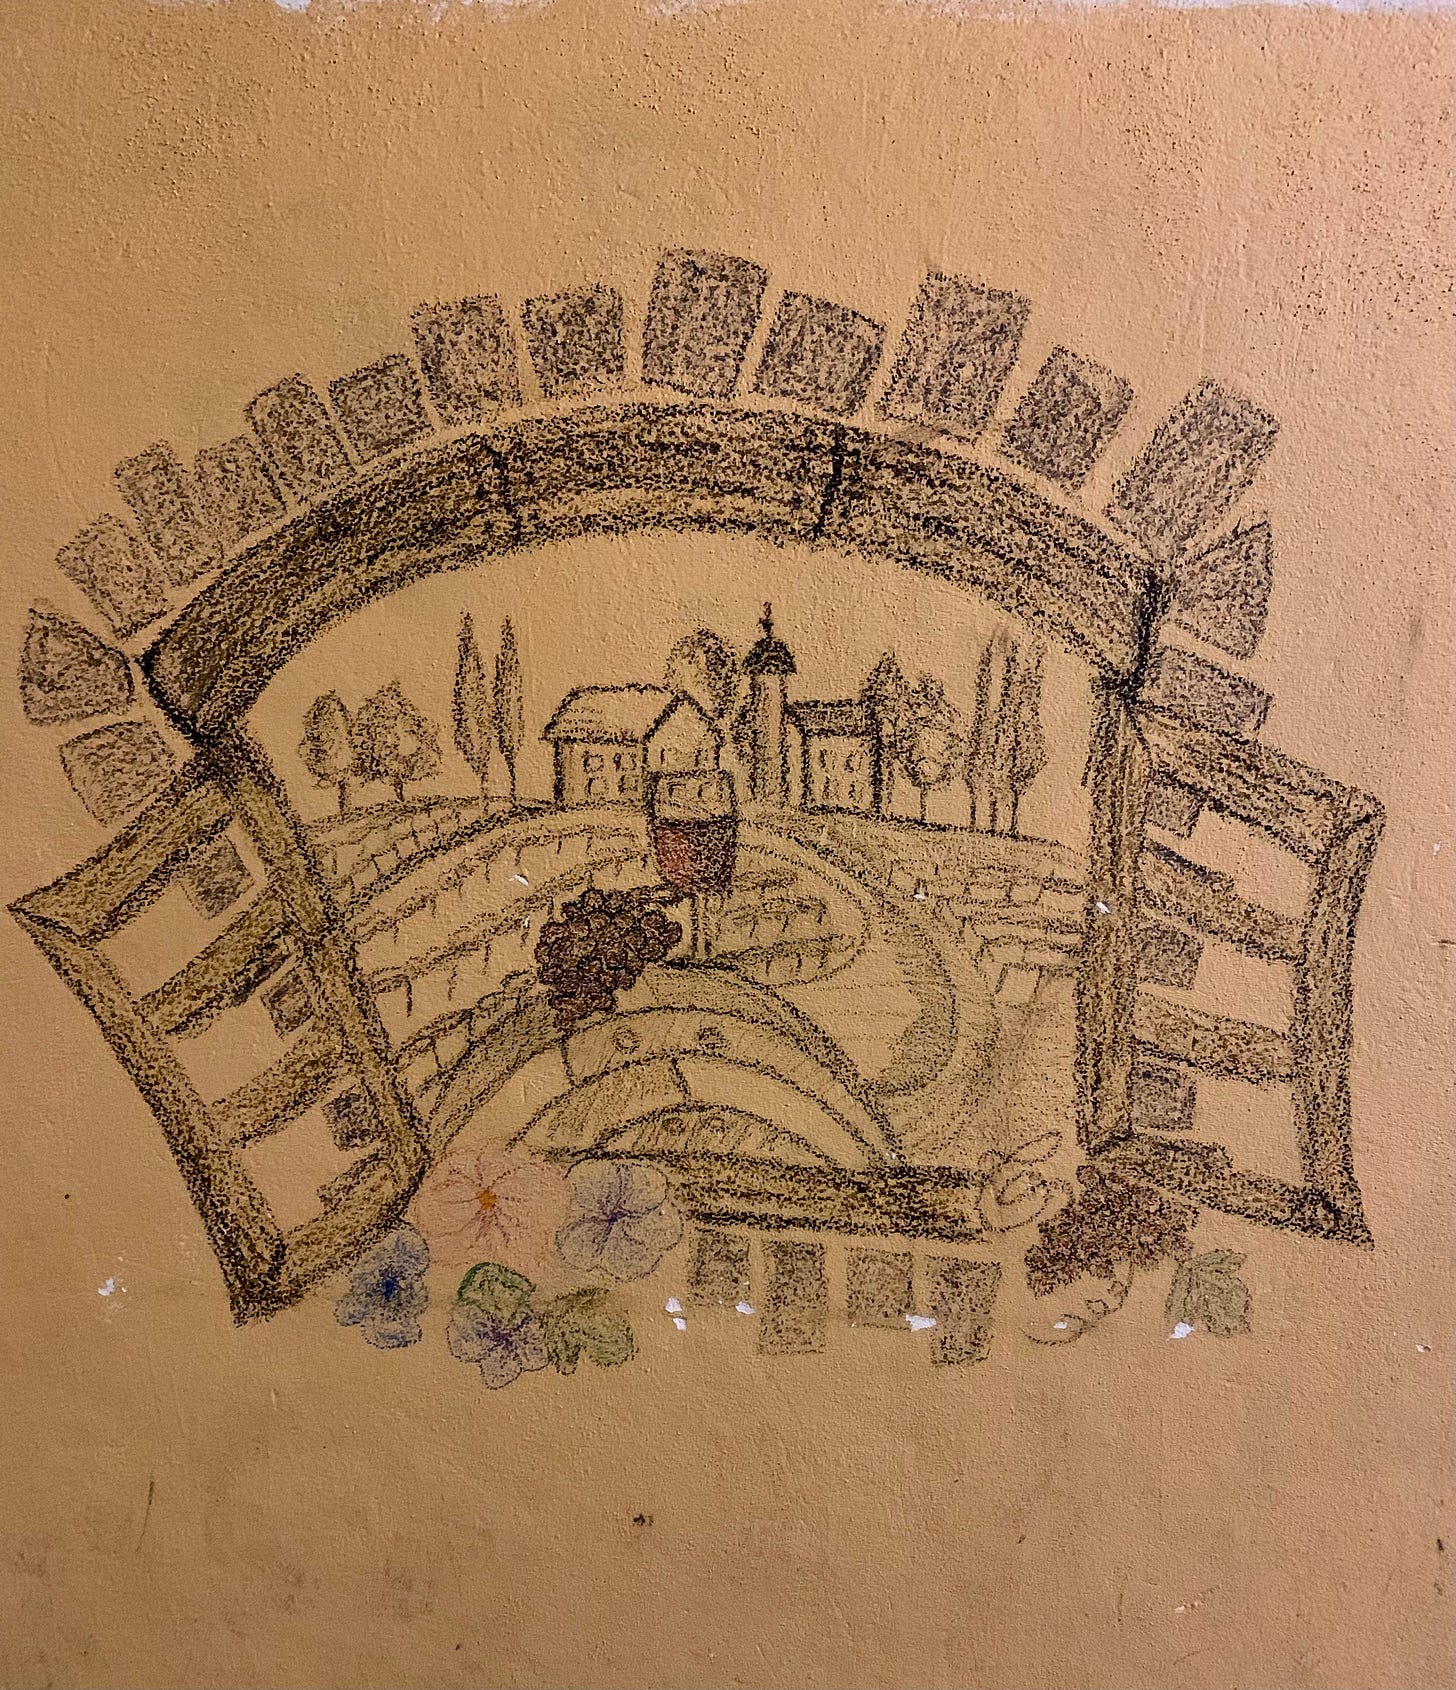 on a wall someone has drawn a picture of an open window and a view of a winery in the distance and a wine barrel with a bunch of grapes and a glass of wine in the foreground